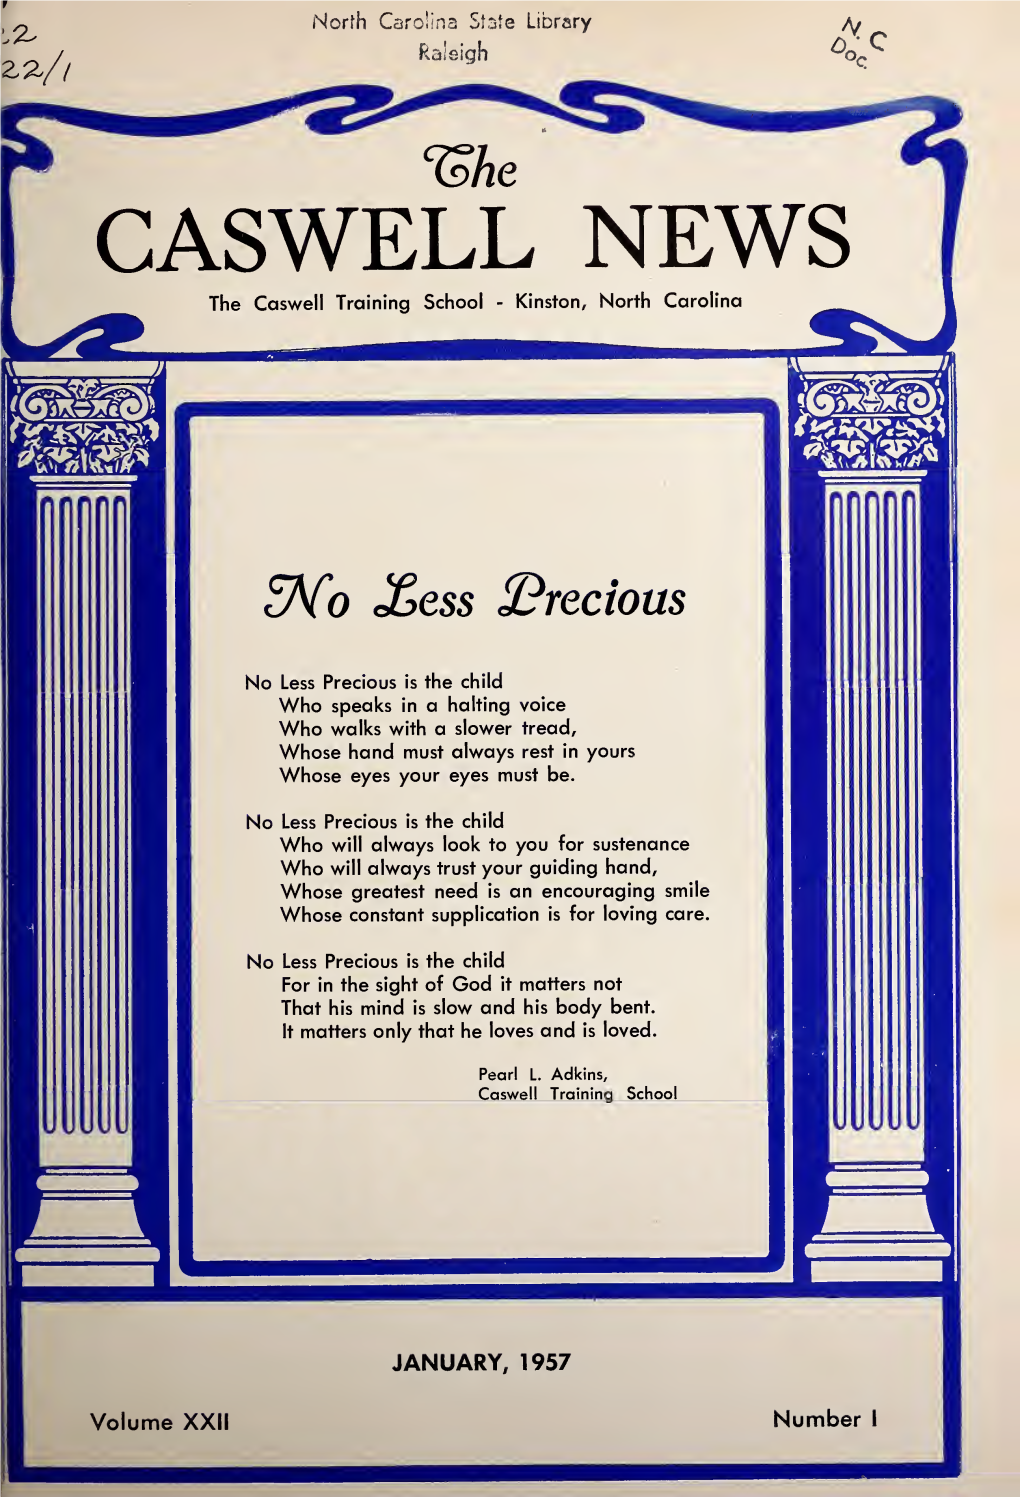 The Caswell News